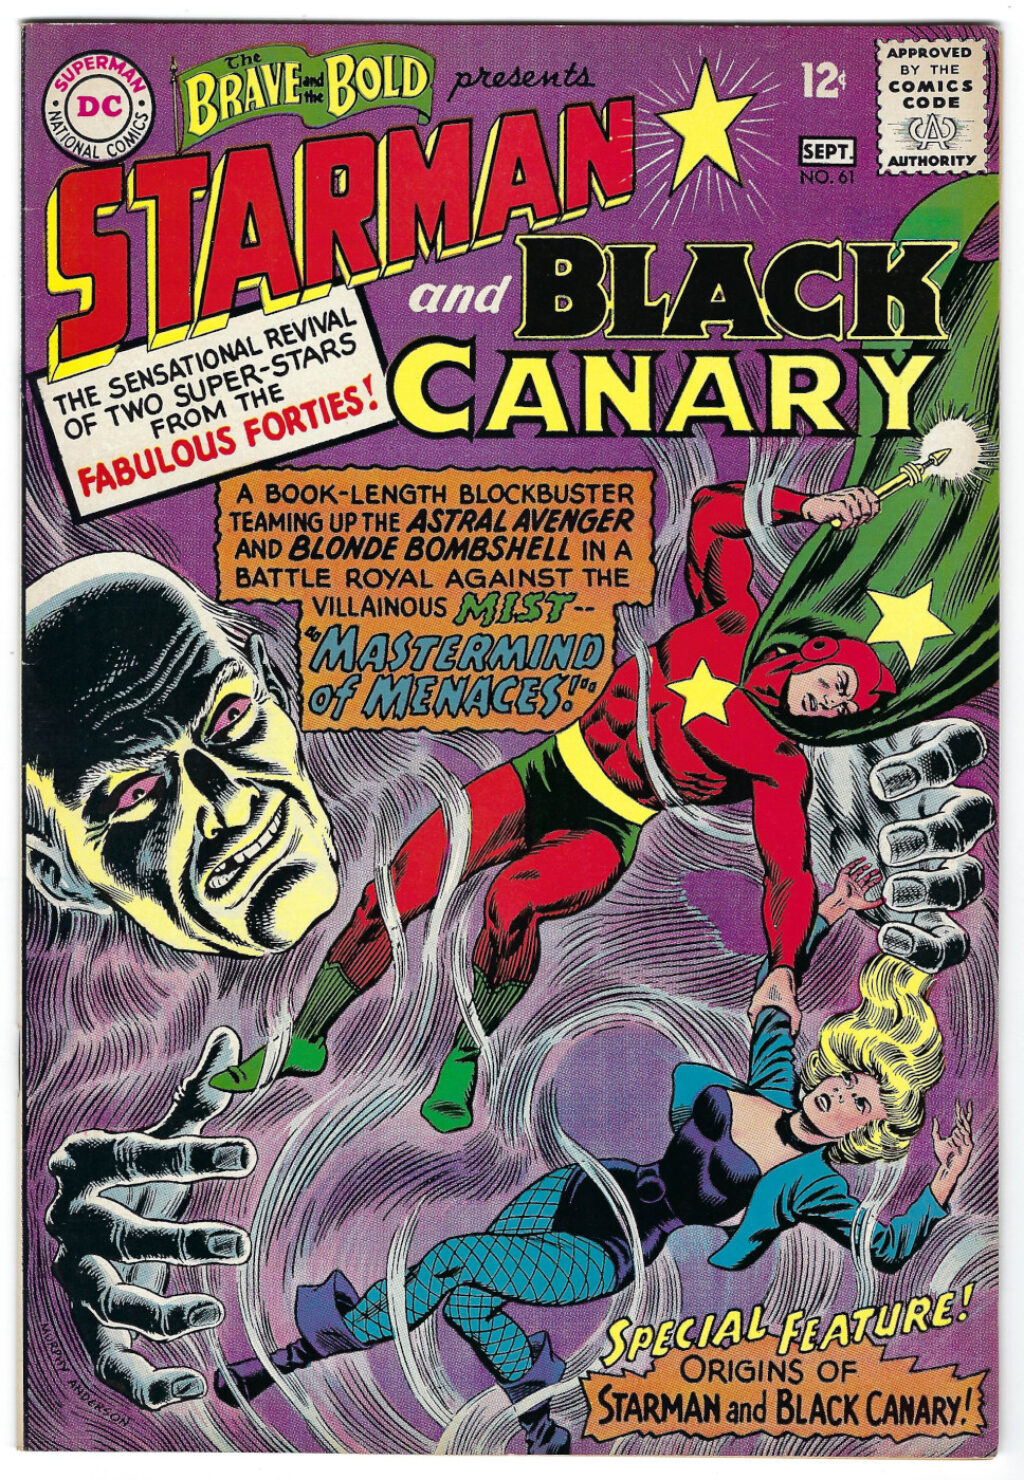 DC Comics The Brave and The Bold (1955) #61: Origins of Starman and Black Canary 1